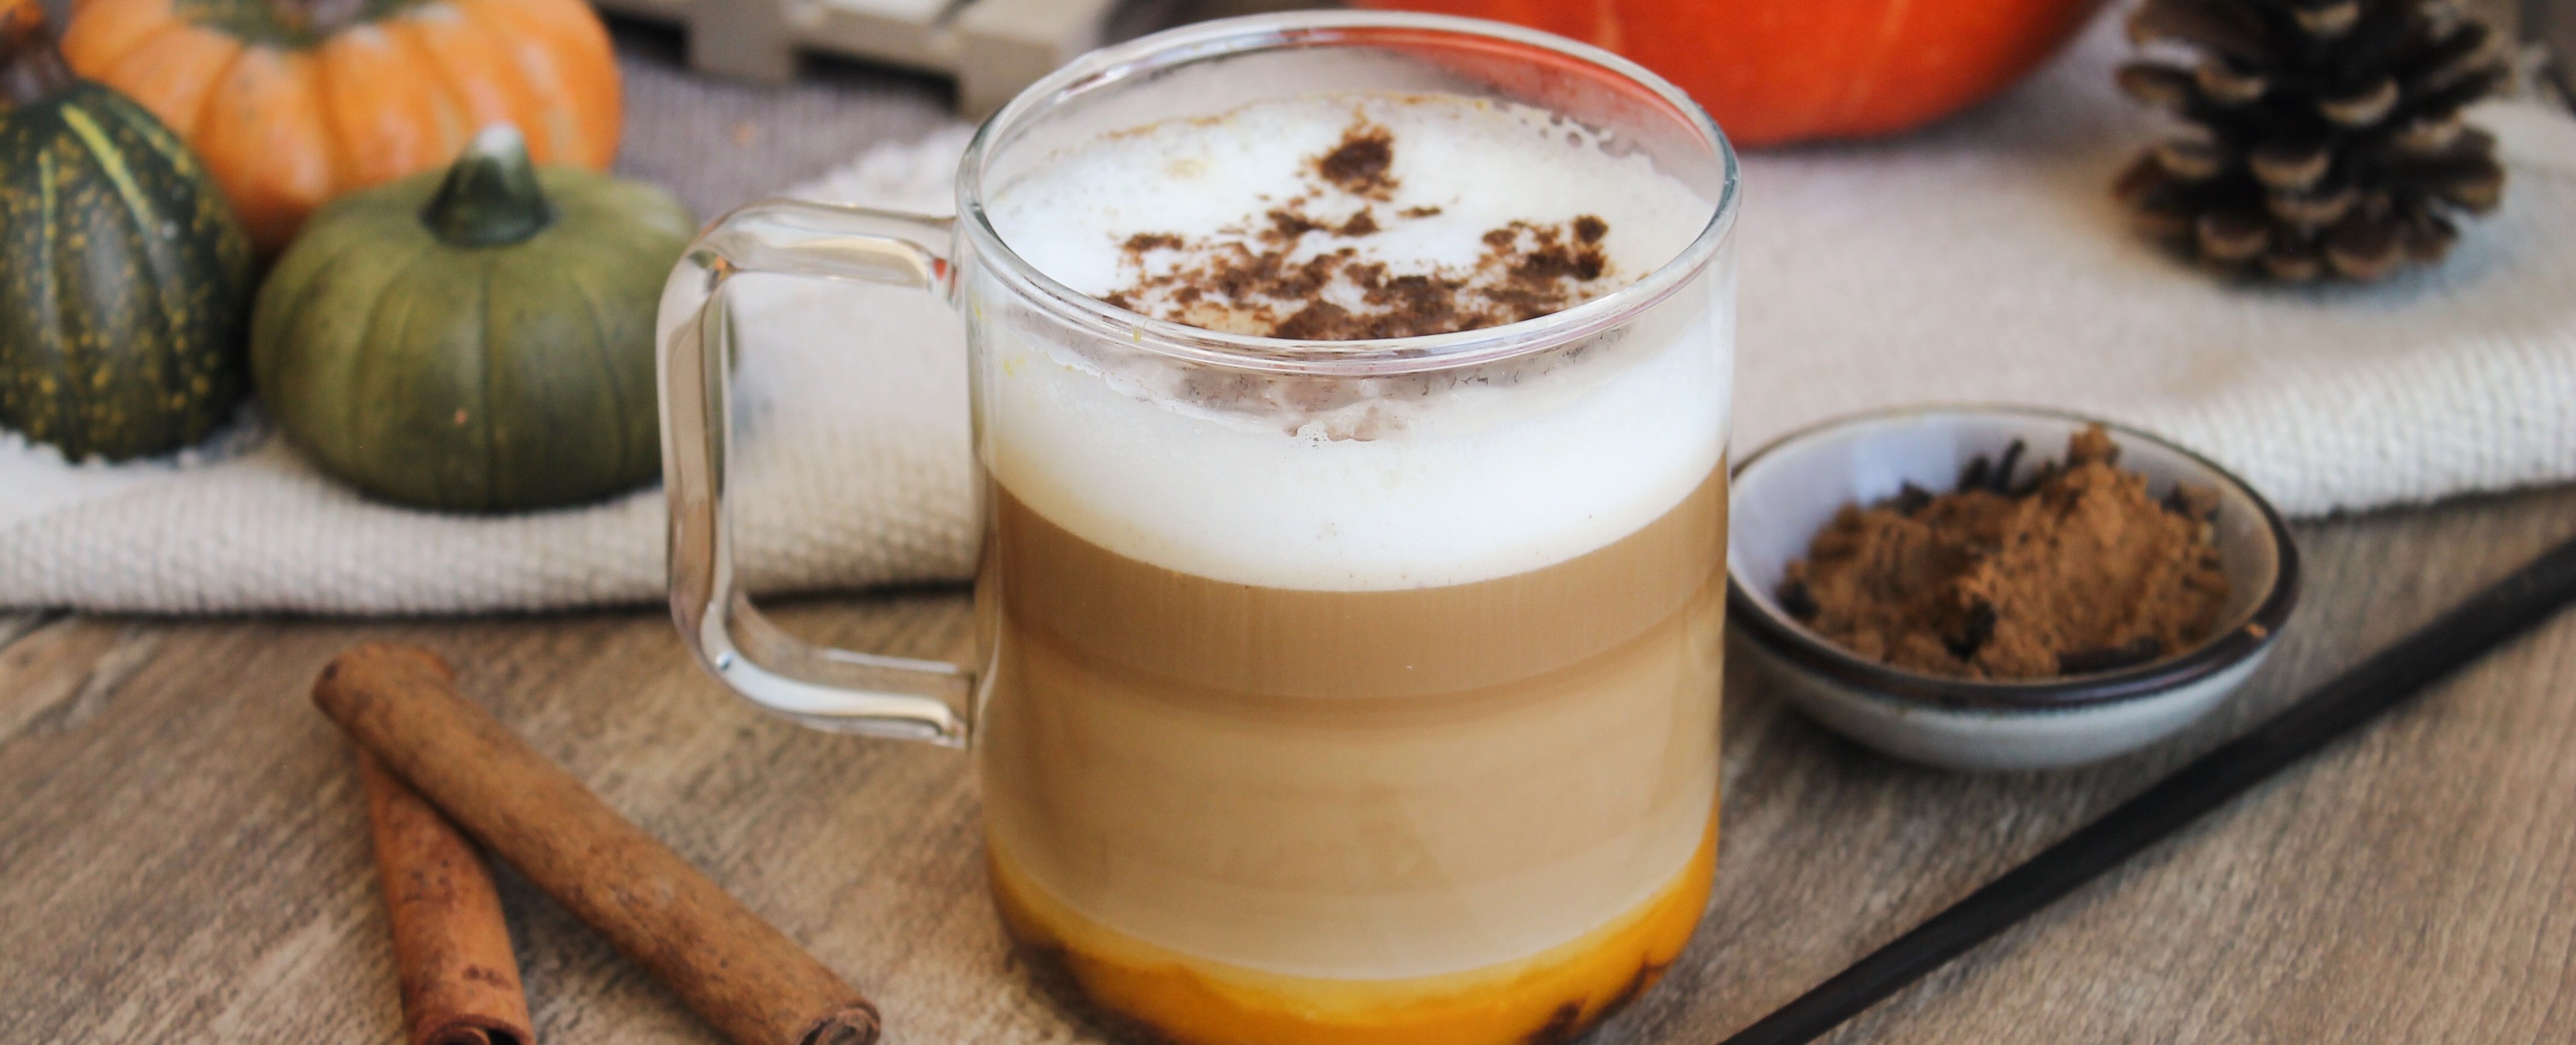 How to make your own pumpkin spiced latte all by yourself – easy